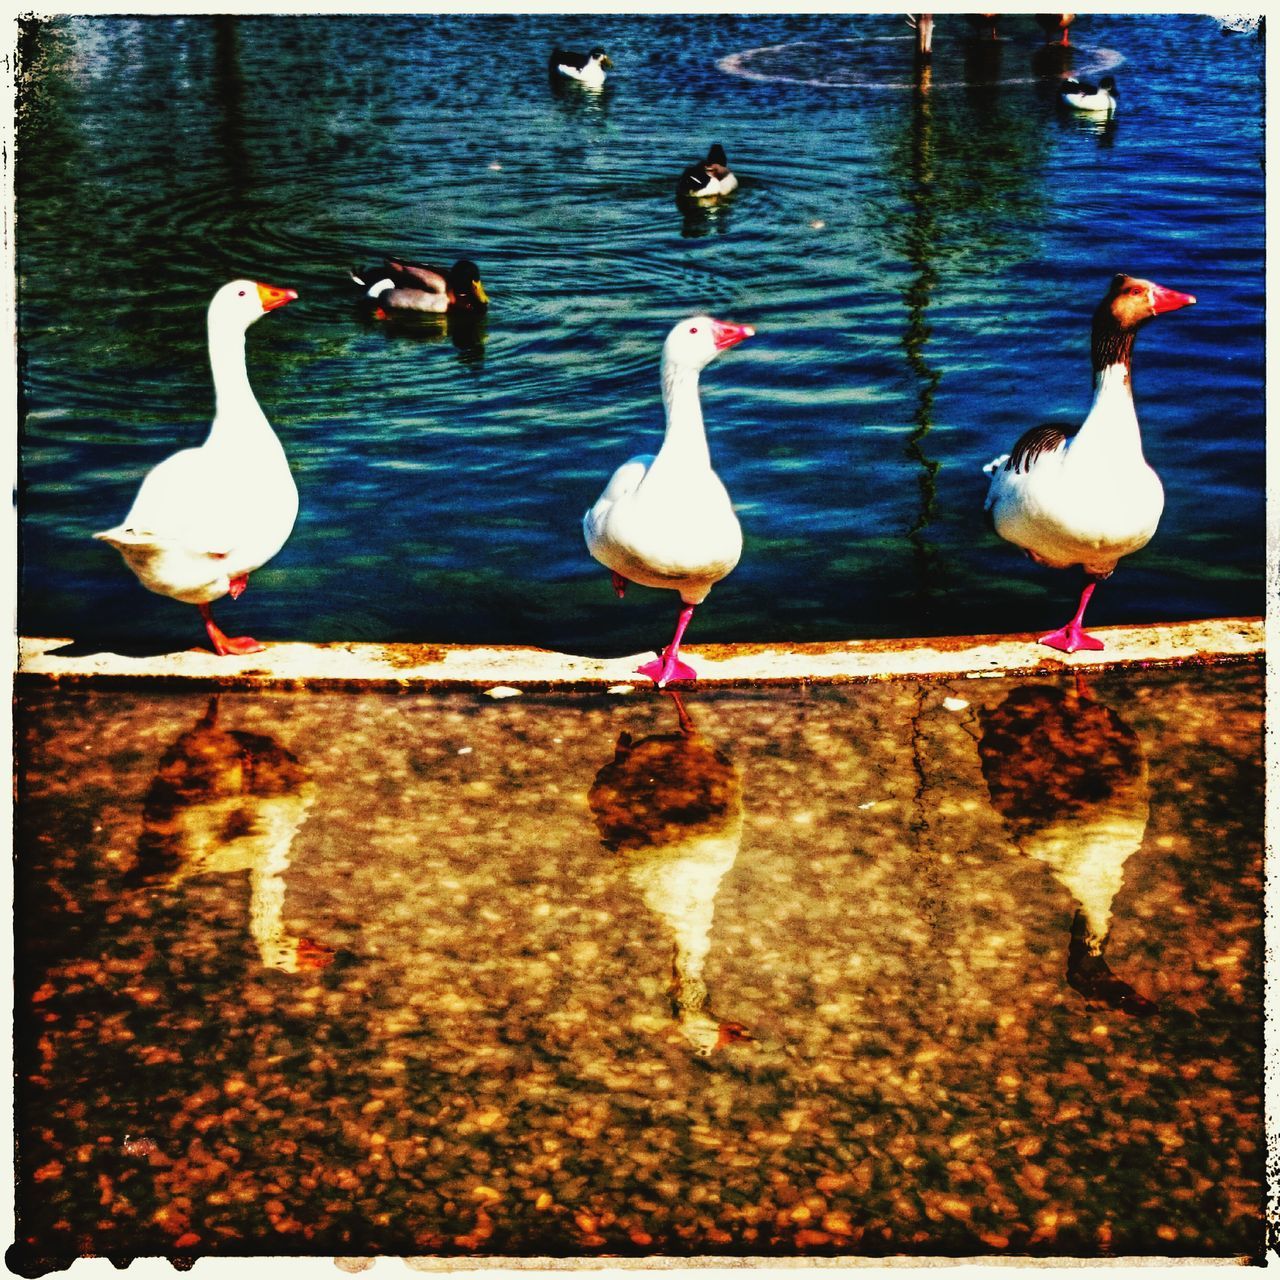 bird, animal themes, water, animals in the wild, wildlife, transfer print, flock of birds, lake, auto post production filter, nature, swan, reflection, outdoors, day, seagull, togetherness, medium group of animals, duck, no people